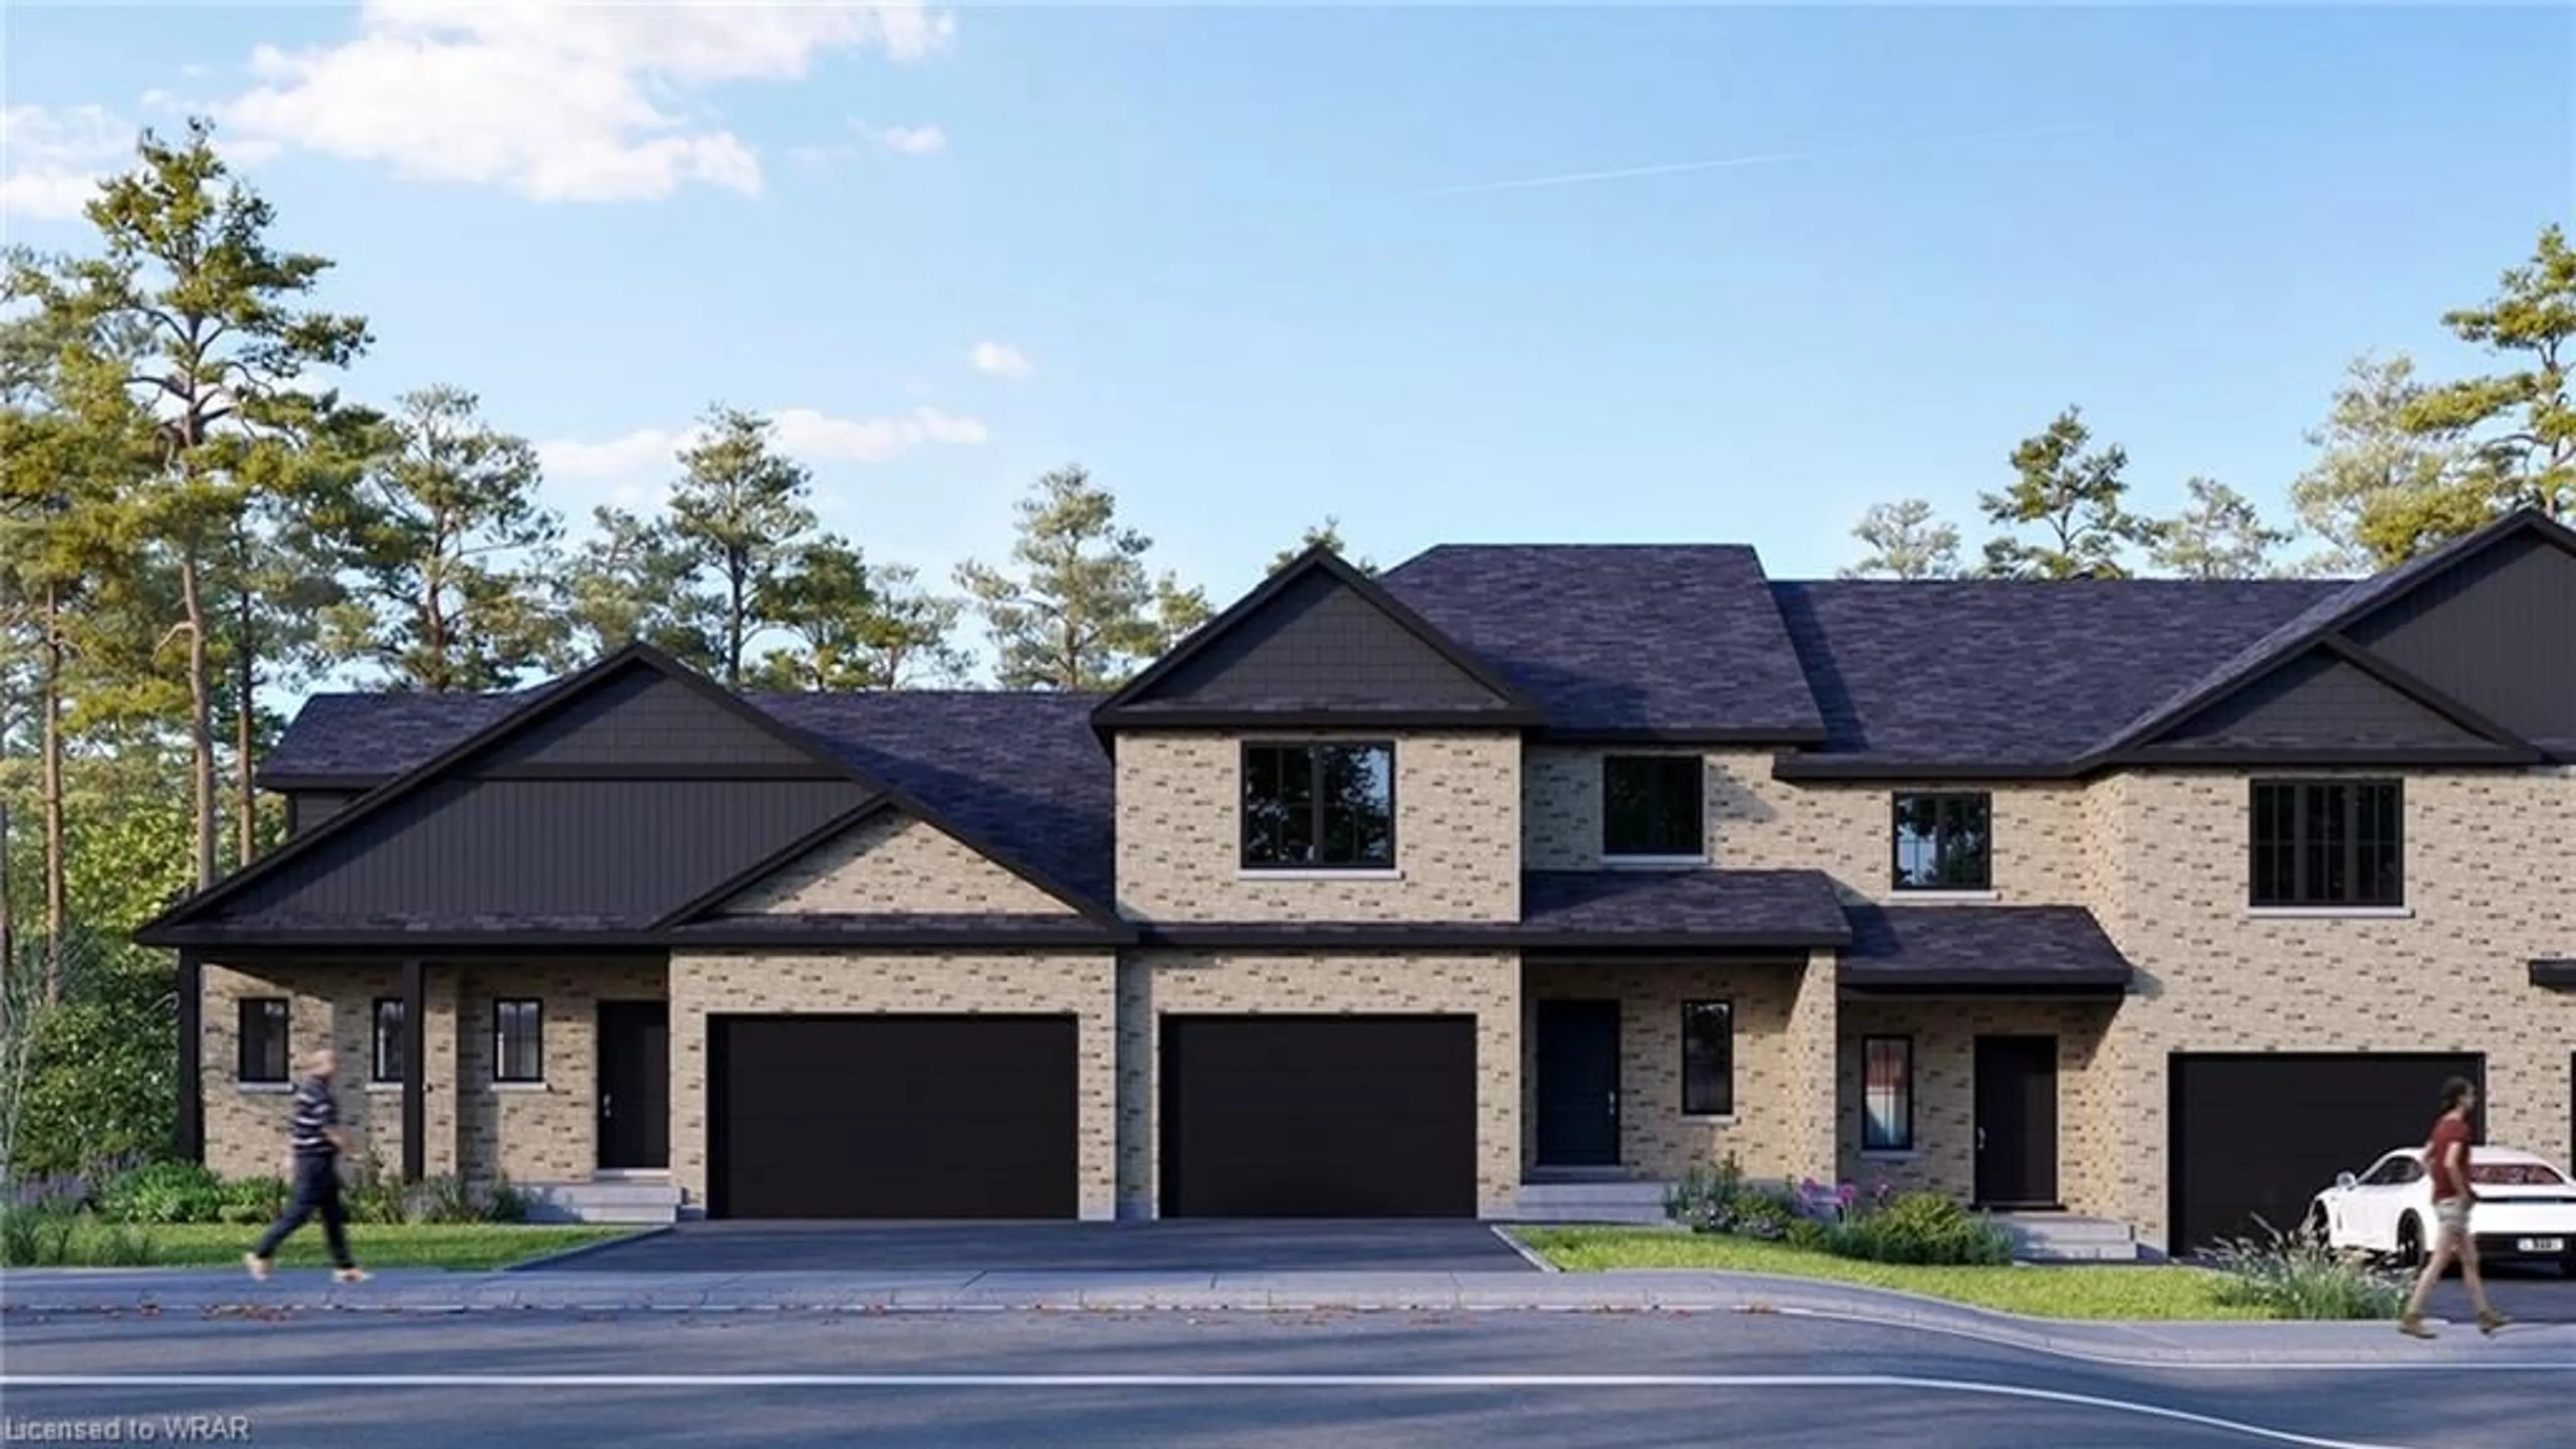 Home with brick exterior material for 642 Wray Ave, Listowel Ontario N4W 3K9